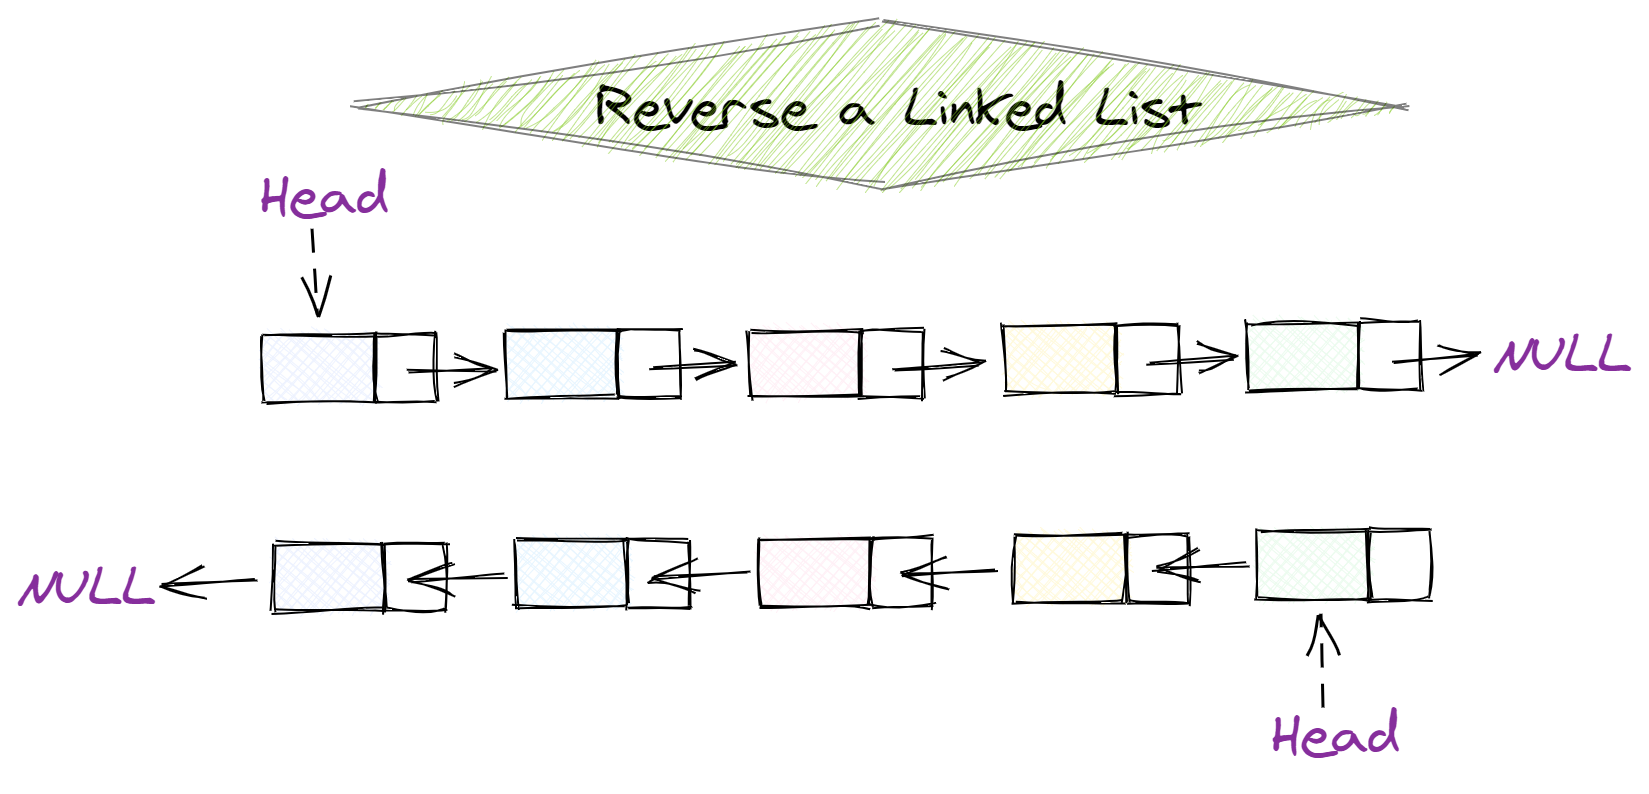 How to Reverse a Linked List?